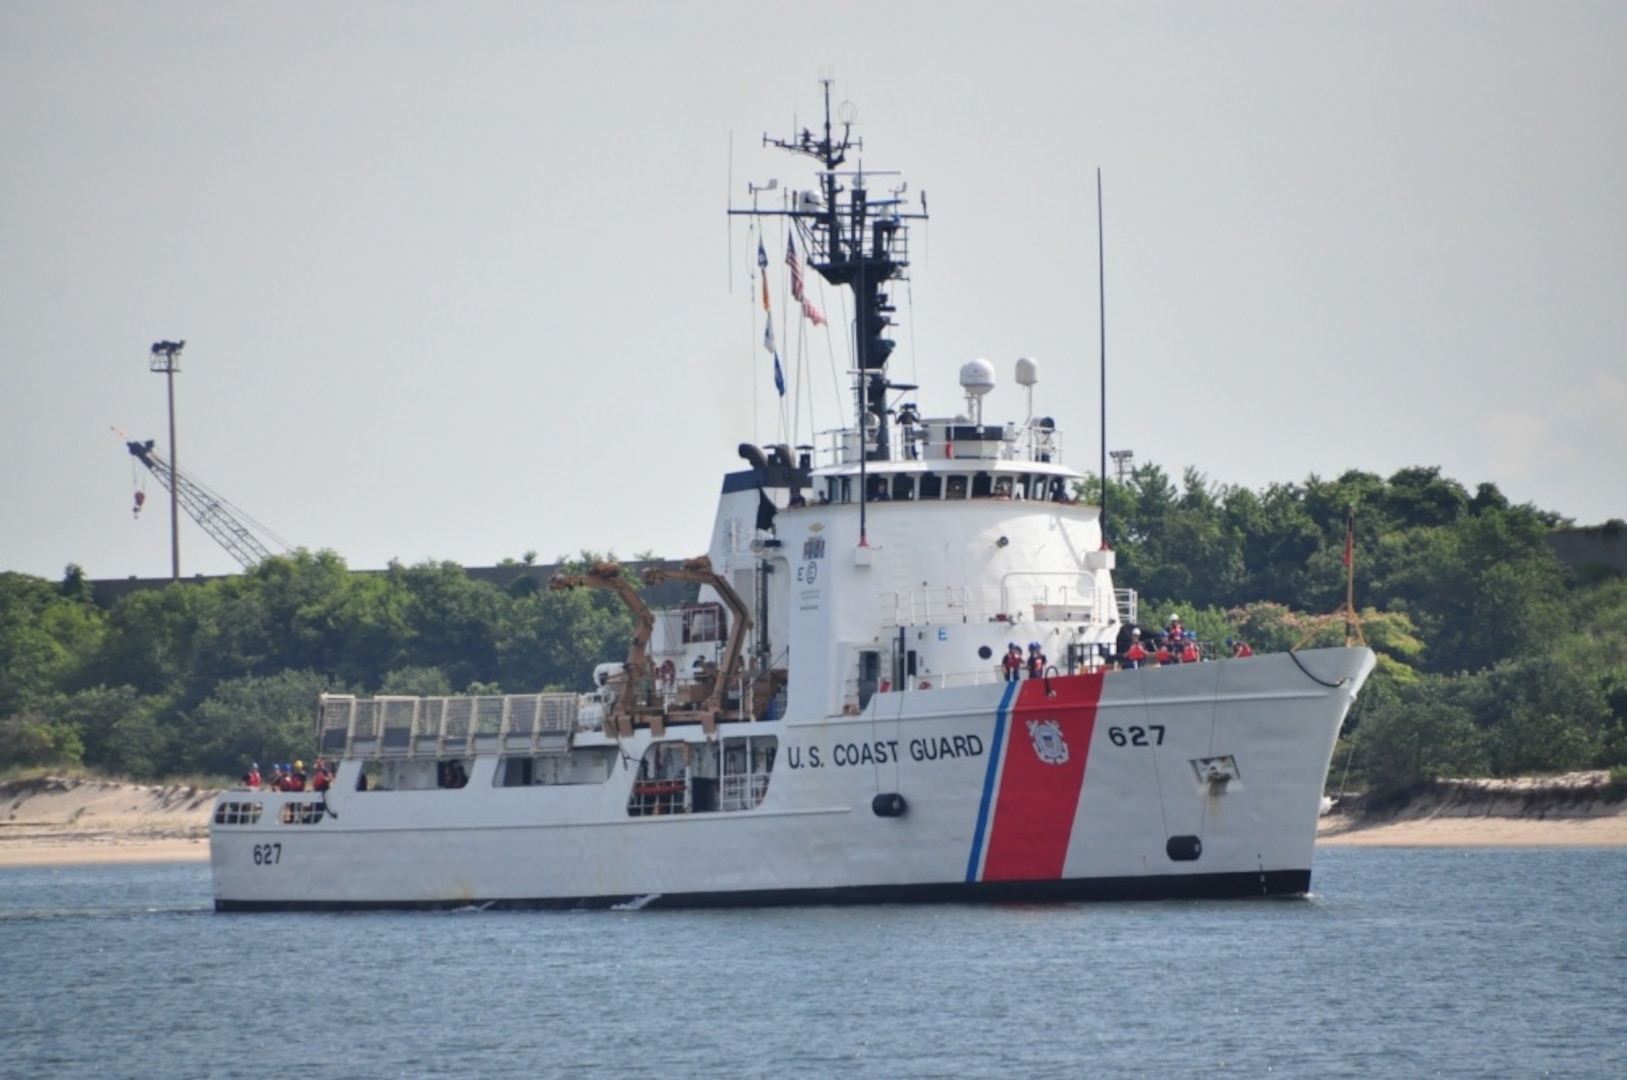 The Coast Guard Cutter Vigorous transits the water near Virginia Beach, Virginia, July 11, 2016. Vigorous returned home following a 55-day deployment in the Eastern Pacific Ocean in support of the Coast Guard's Western Hemisphere Strategy. U.S. Coast Guard photo by Petty Officer 1st Class Melissa Leake